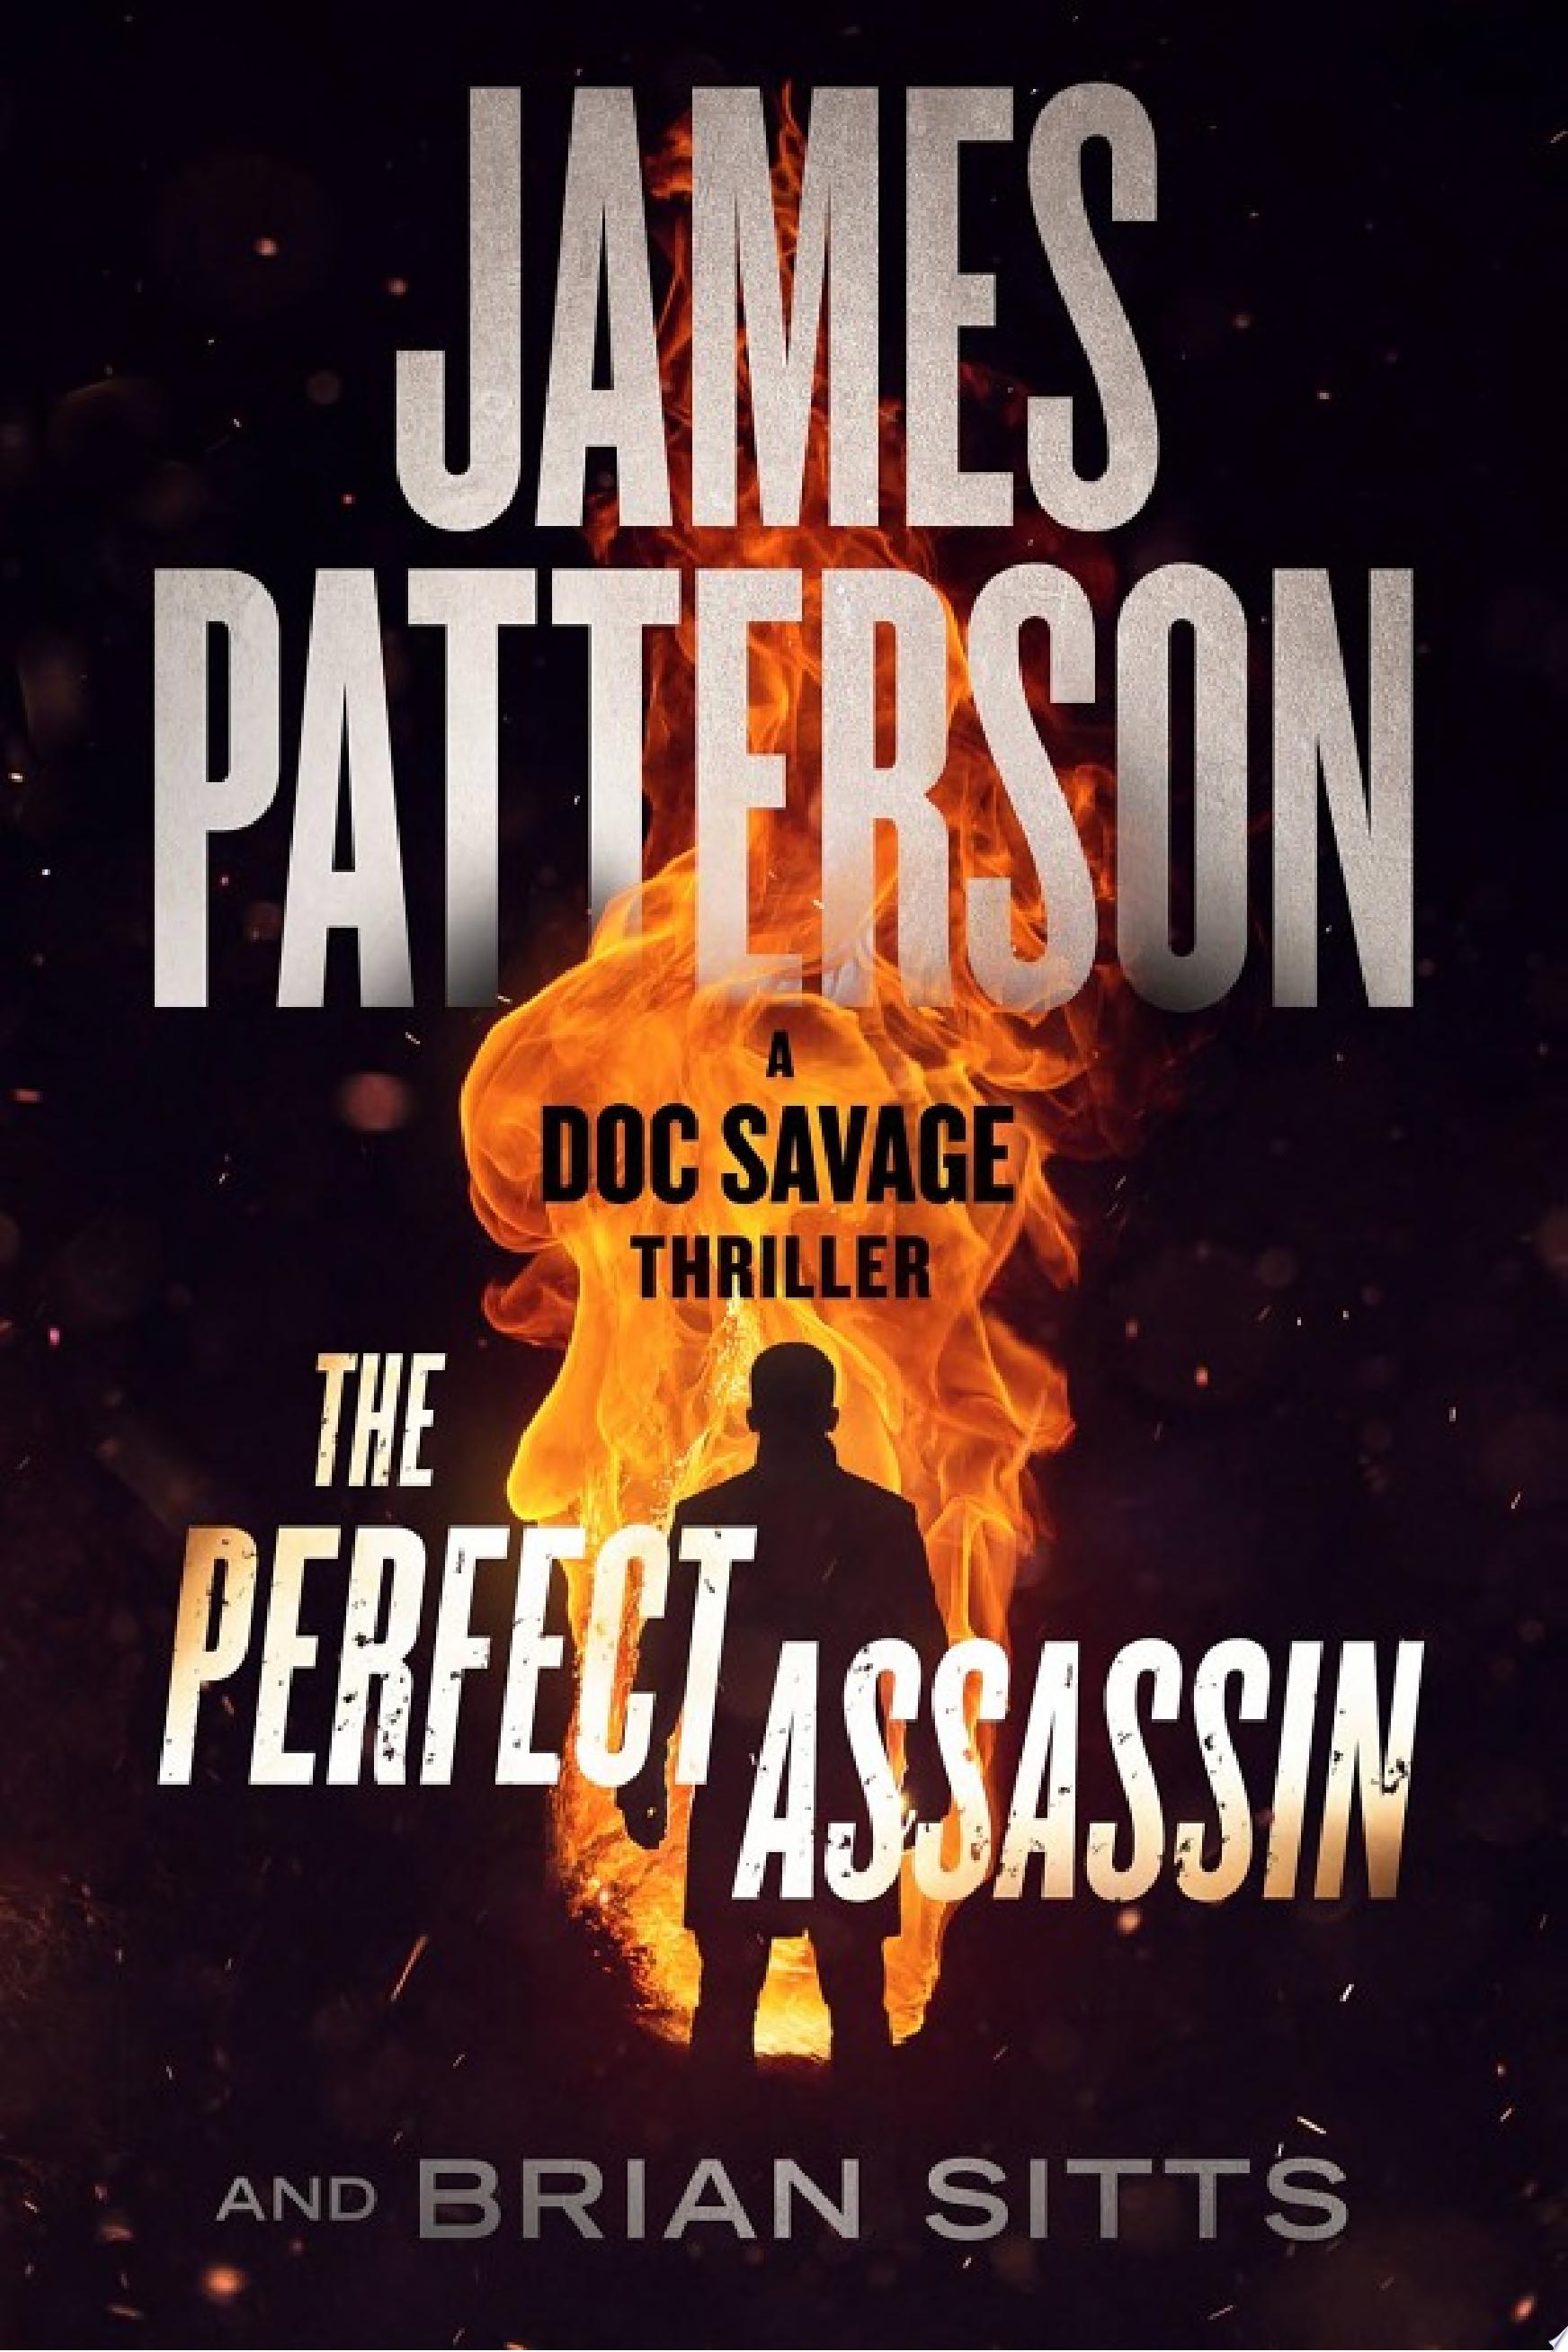 Image for "The Perfect Assassin"